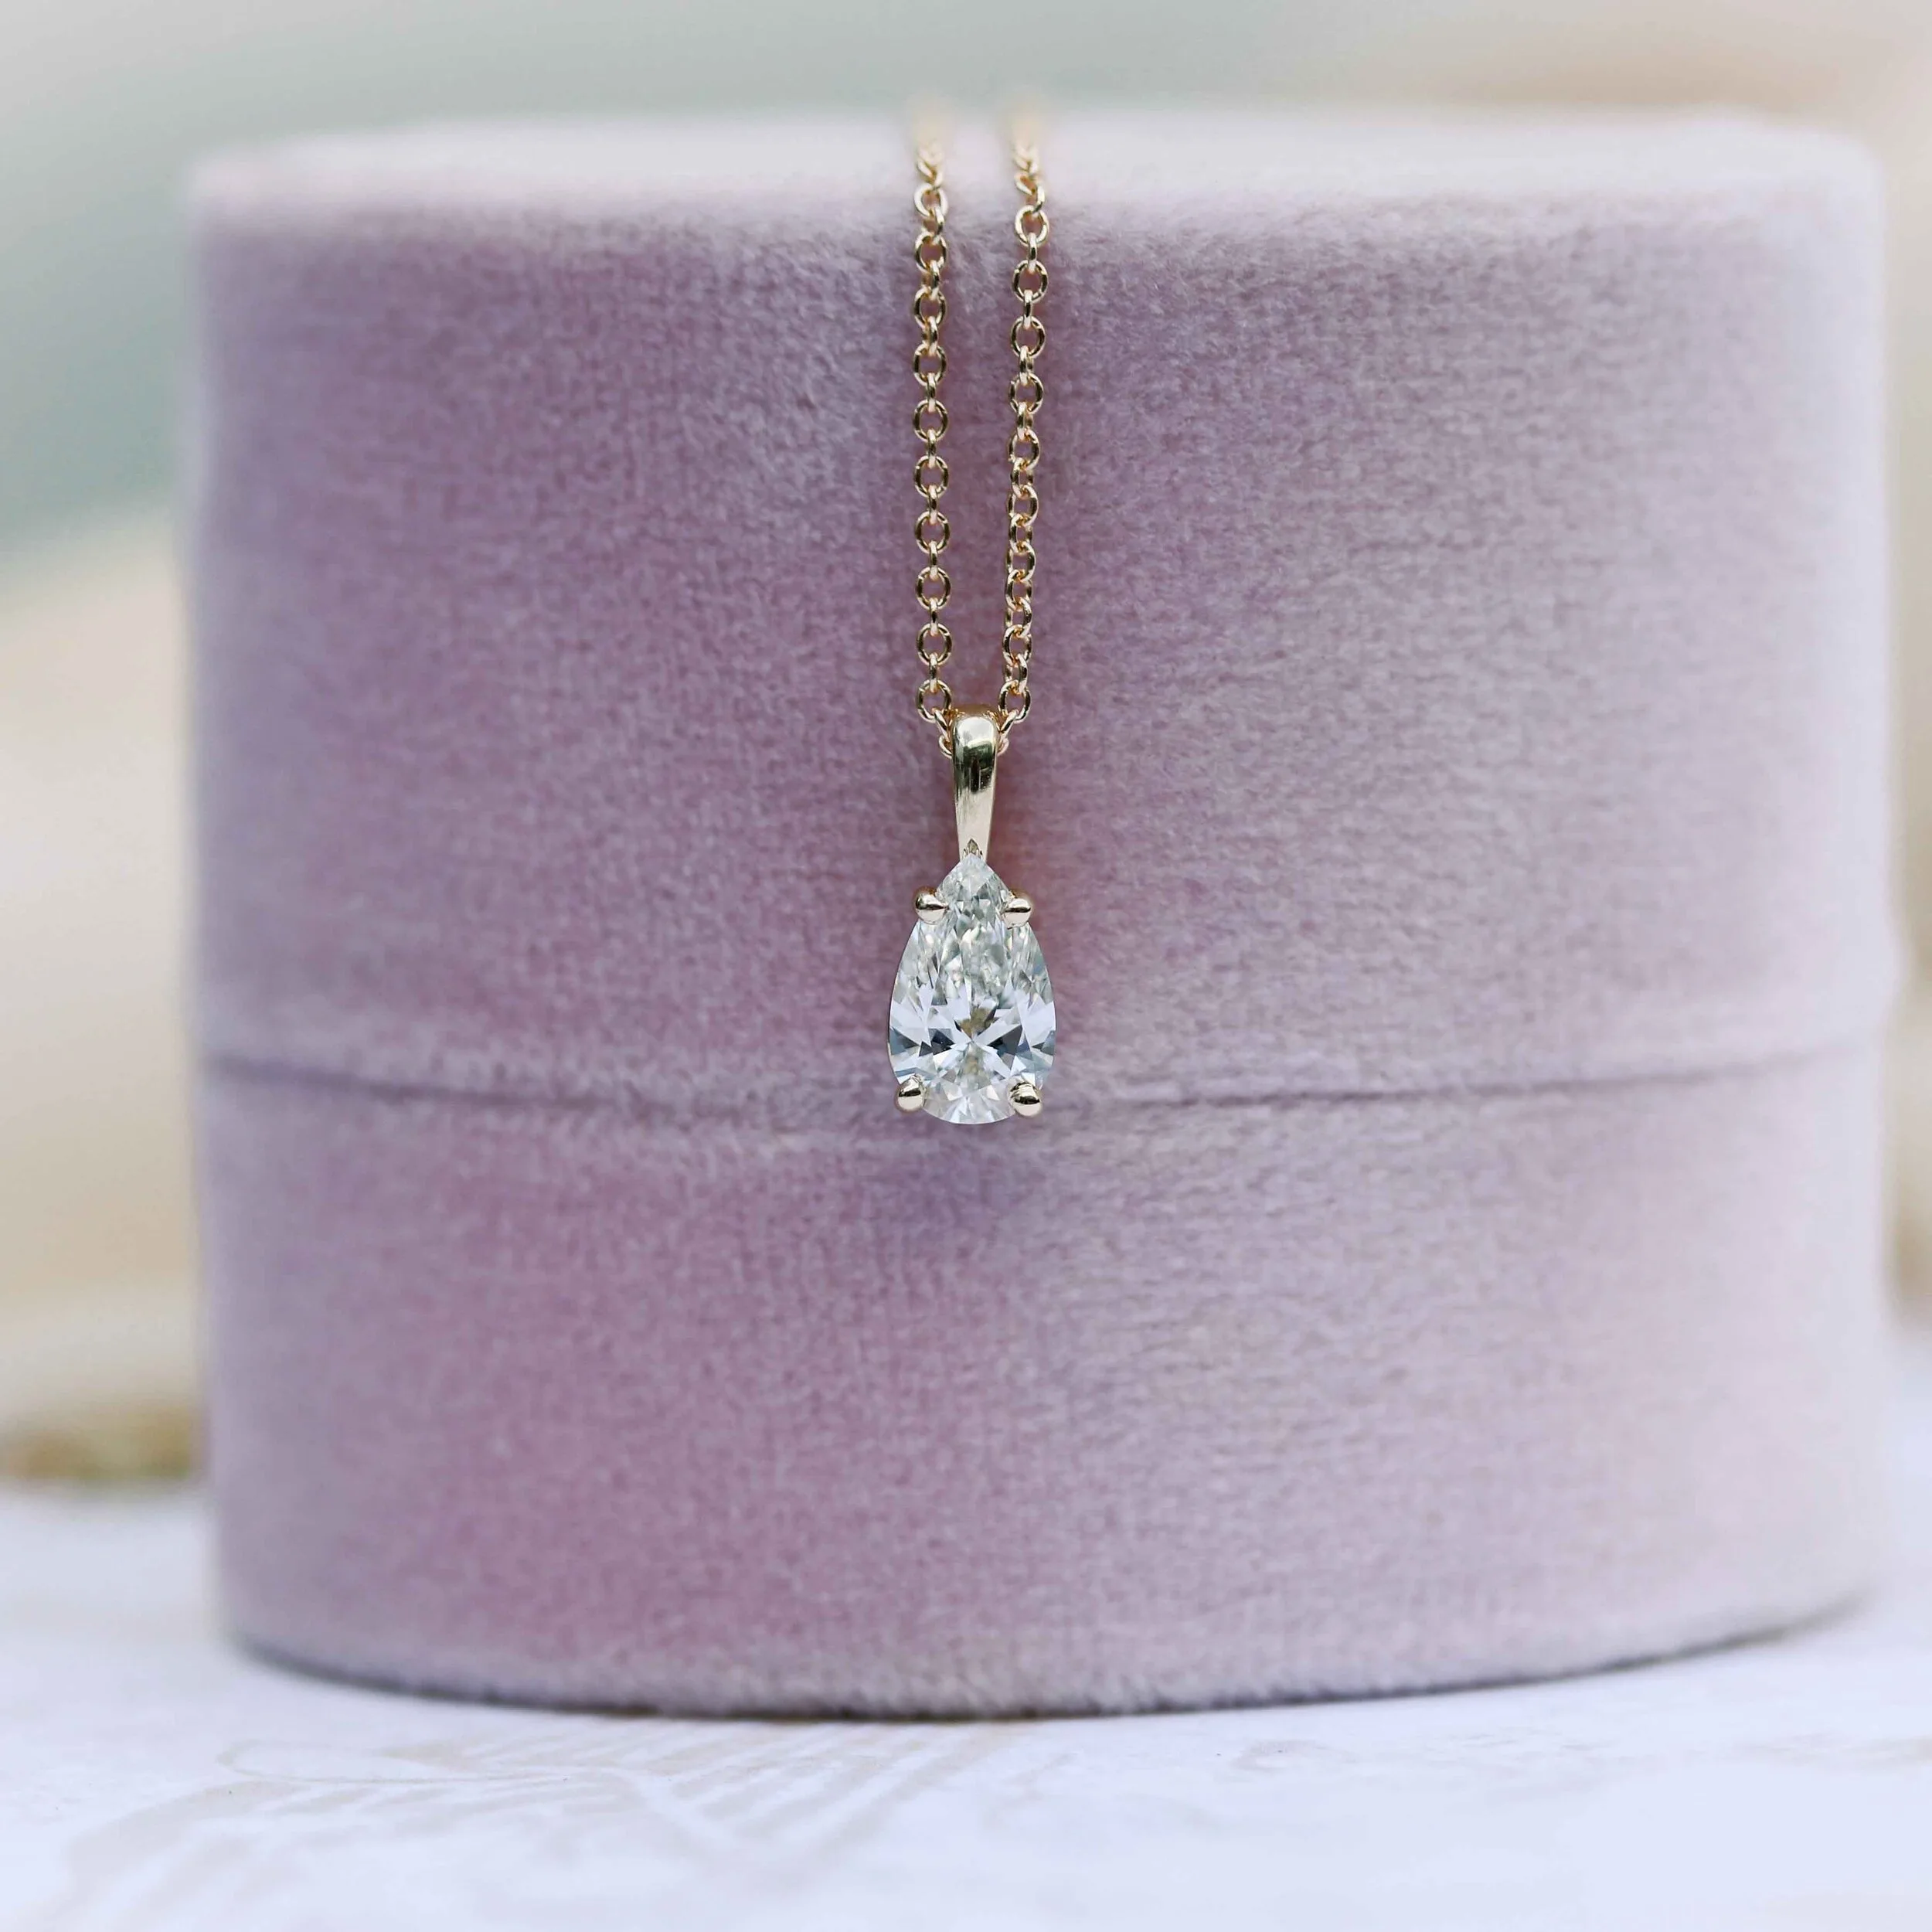 14k Yellow Gold Pear Diamond Solitaire Pendant featuring Exceptional Quality 0.7 Carat Diamonds